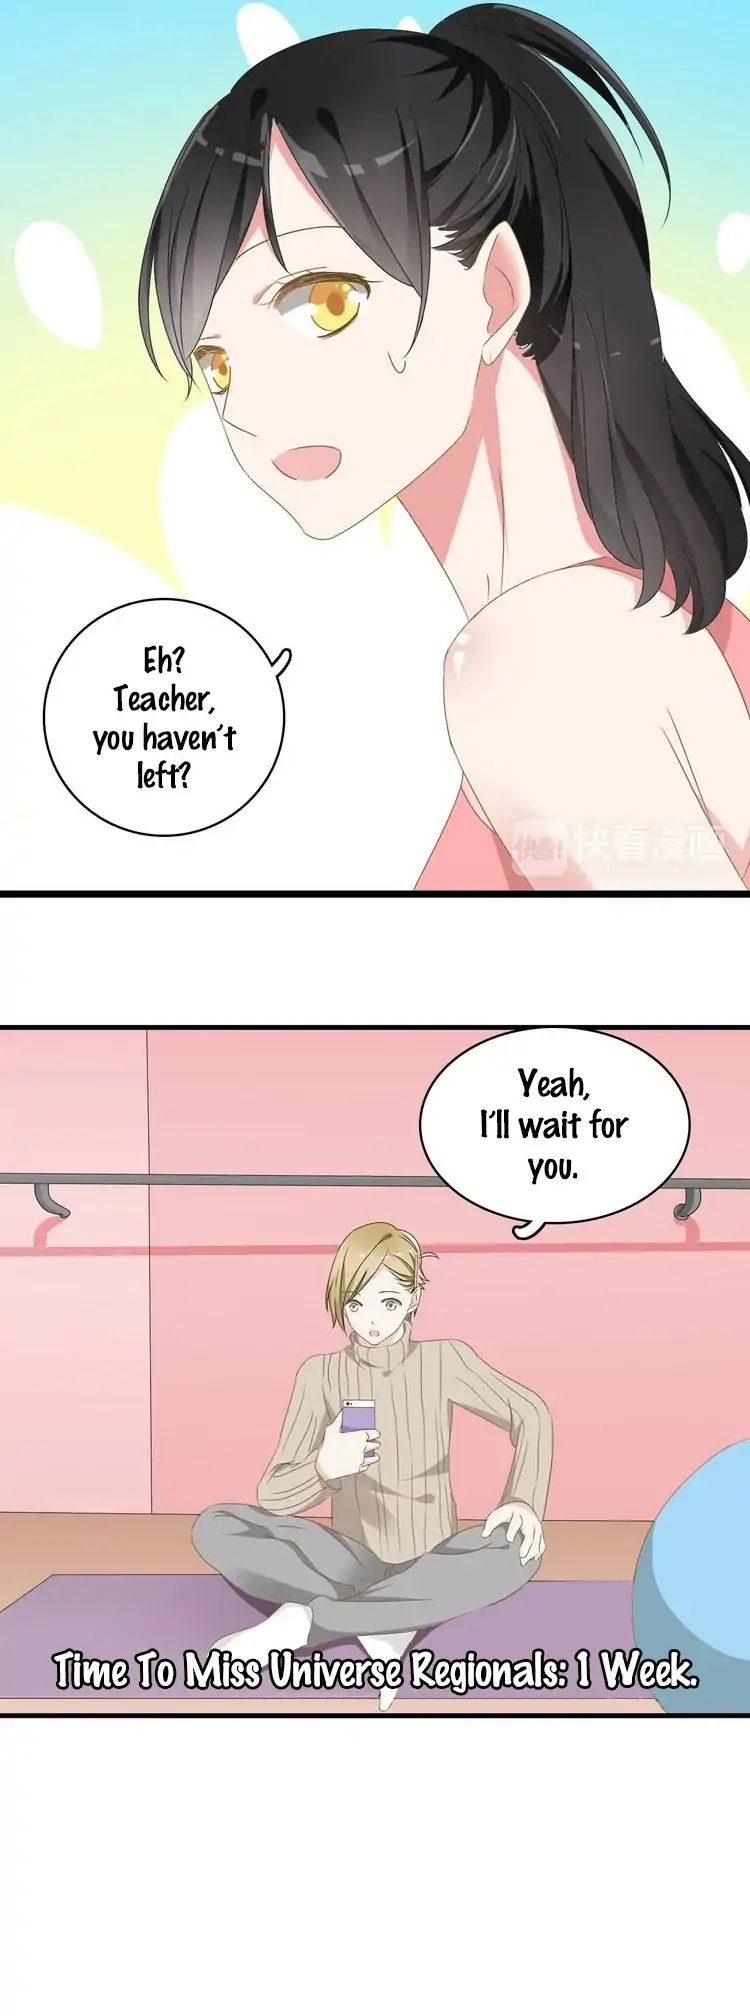 Tall Girls Can Fall In Love Too Chapter 29